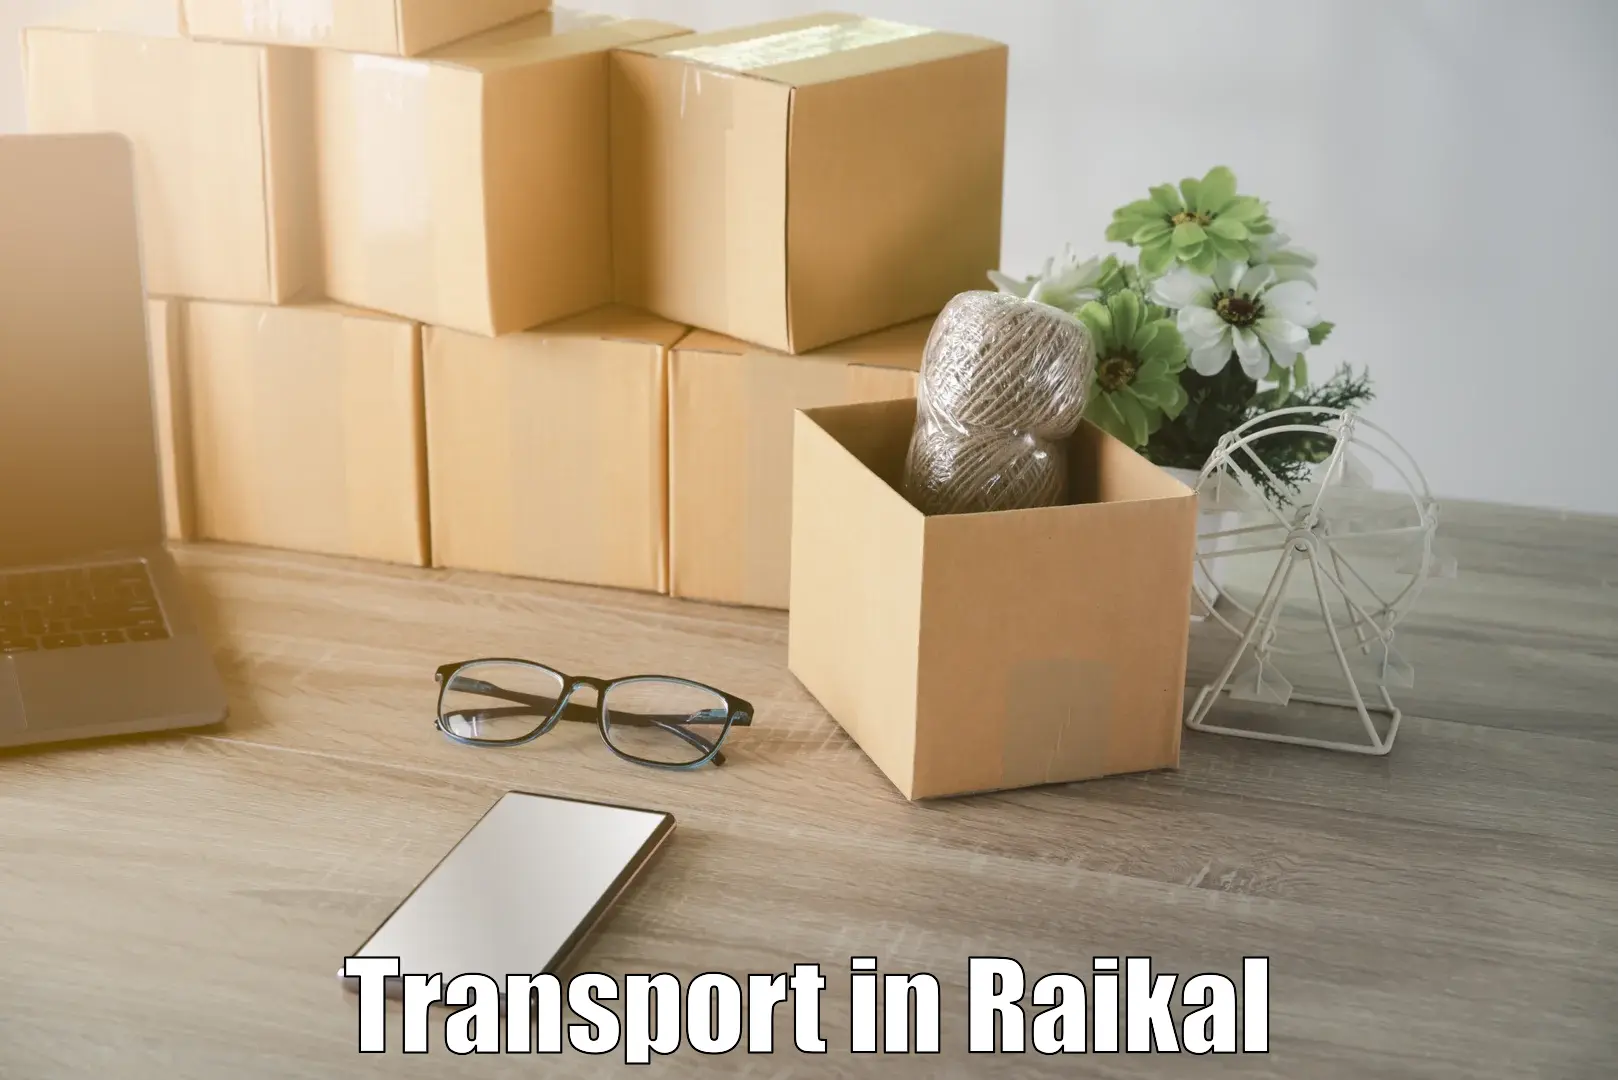 Daily parcel service transport in Raikal